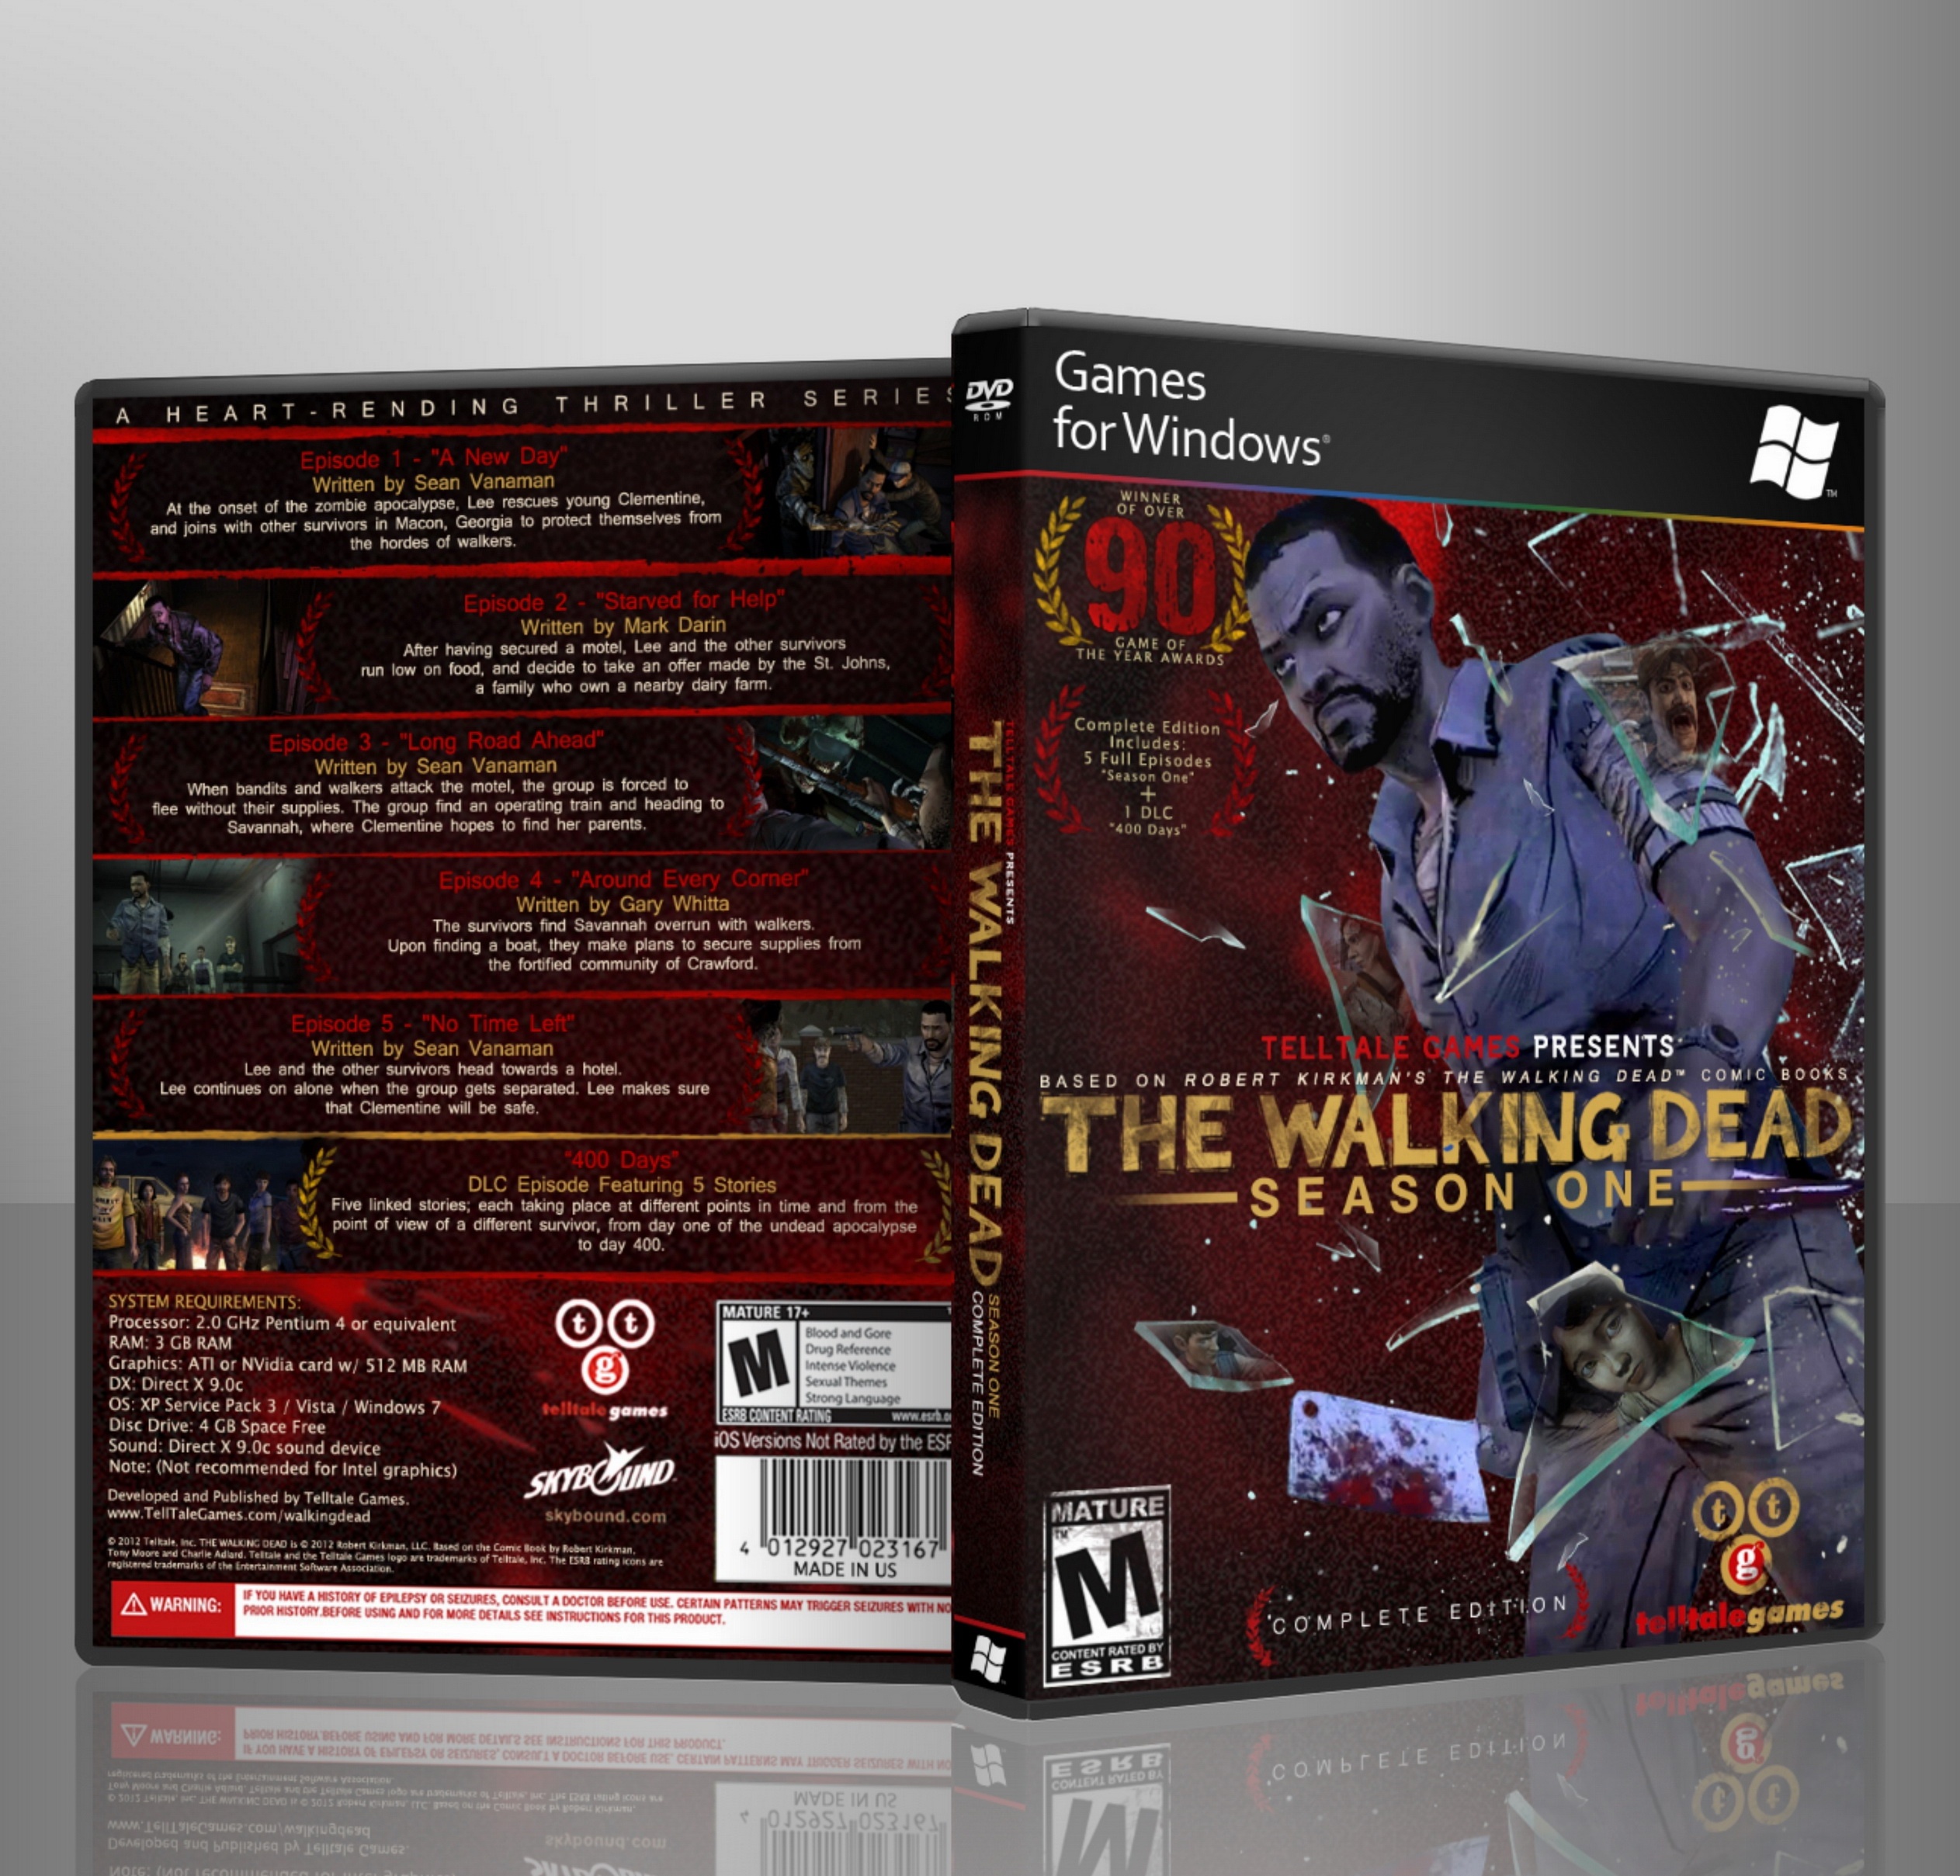 The Walking Dead: Season One: Complete Edition box cover